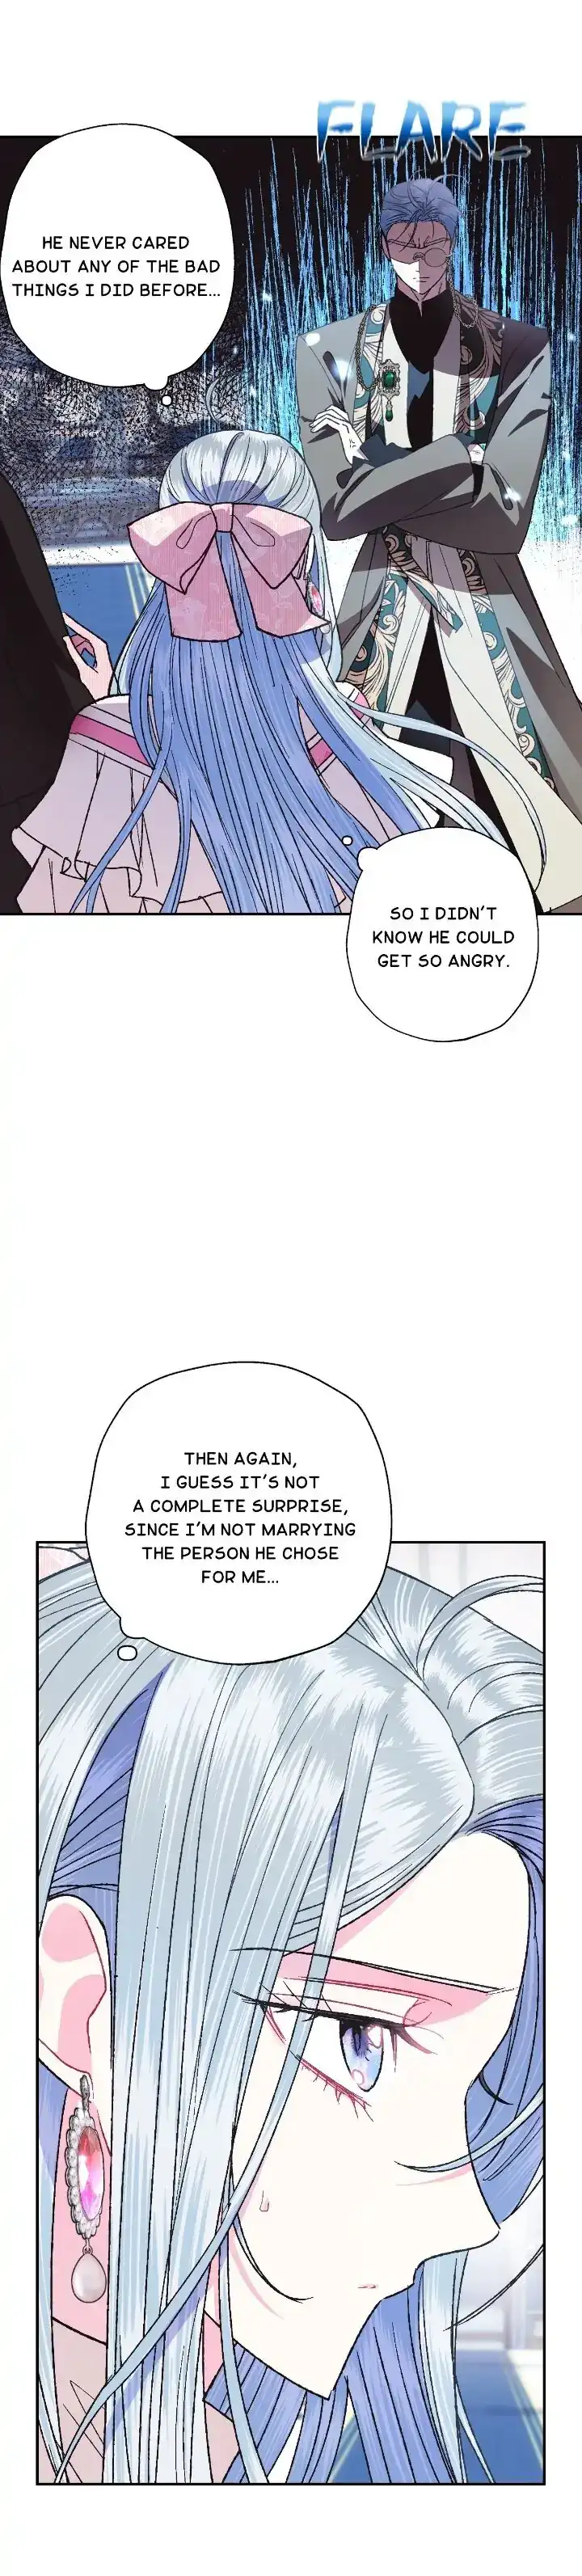 Father, I Don’t Want to Get Married!  - page 7